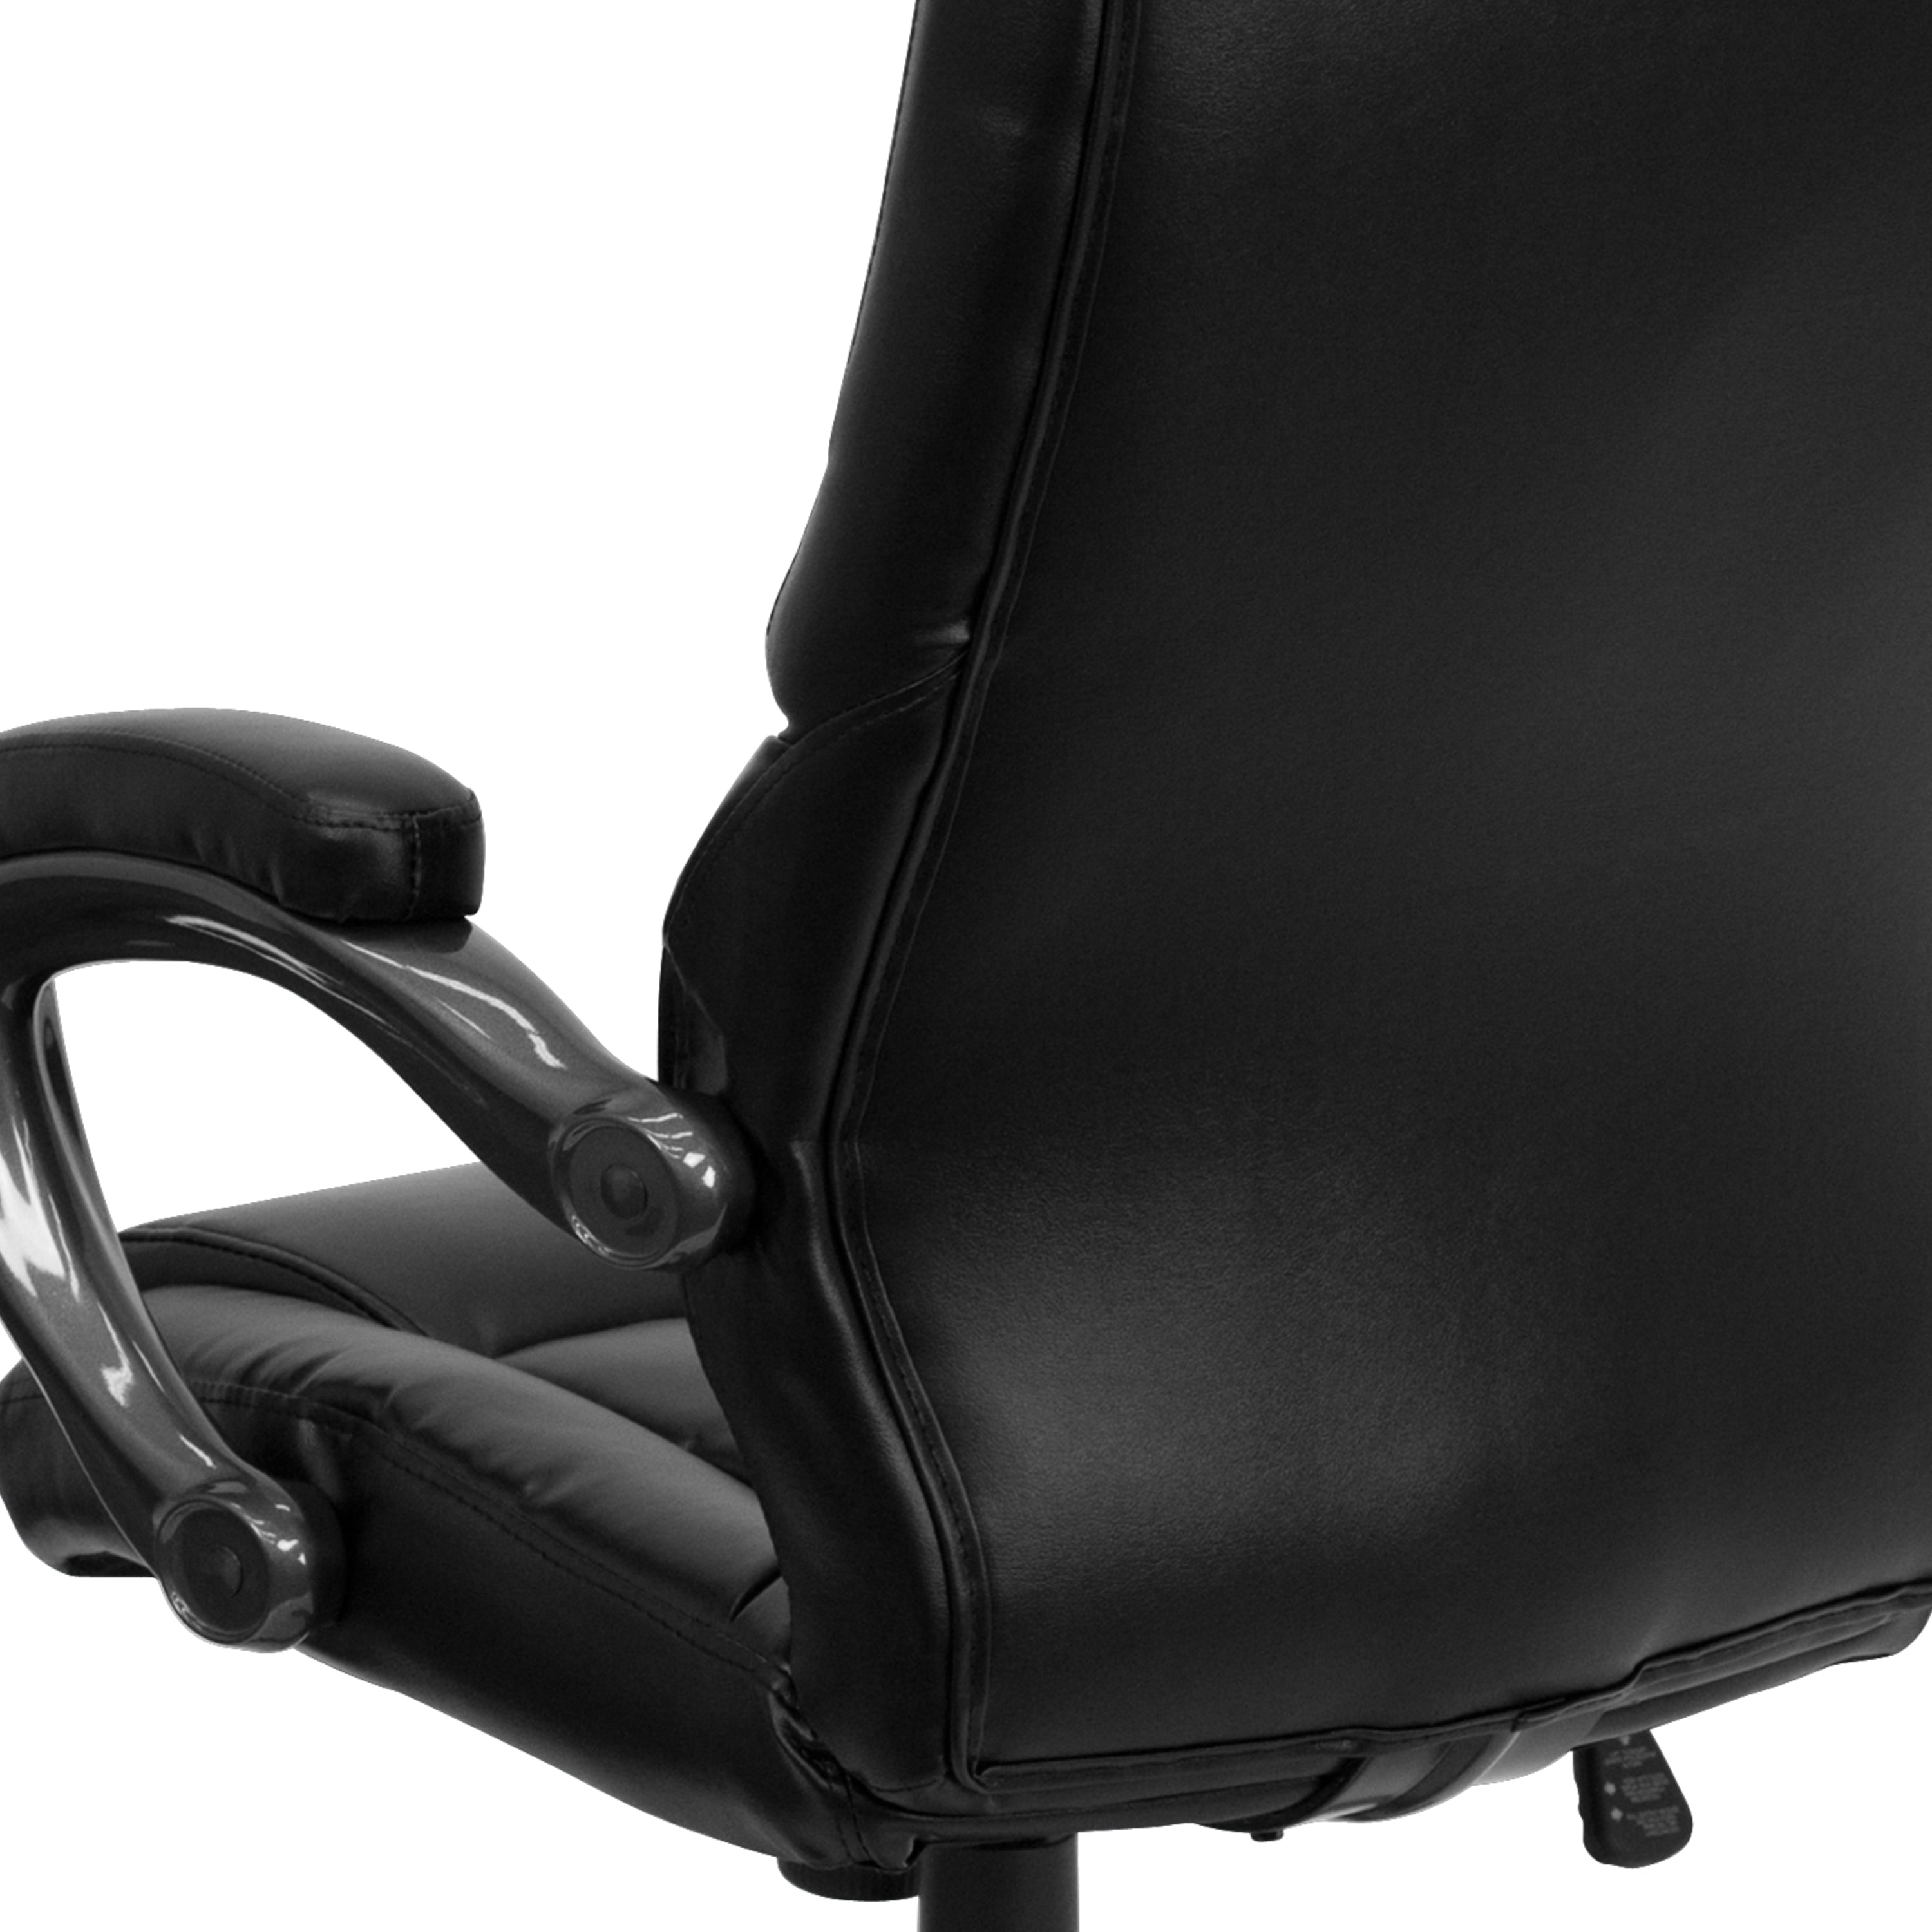 High Back LeatherSoft Executive Swivel Ergonomic Office Chair with Arms-Office Chair-Flash Furniture-Wall2Wall Furnishings